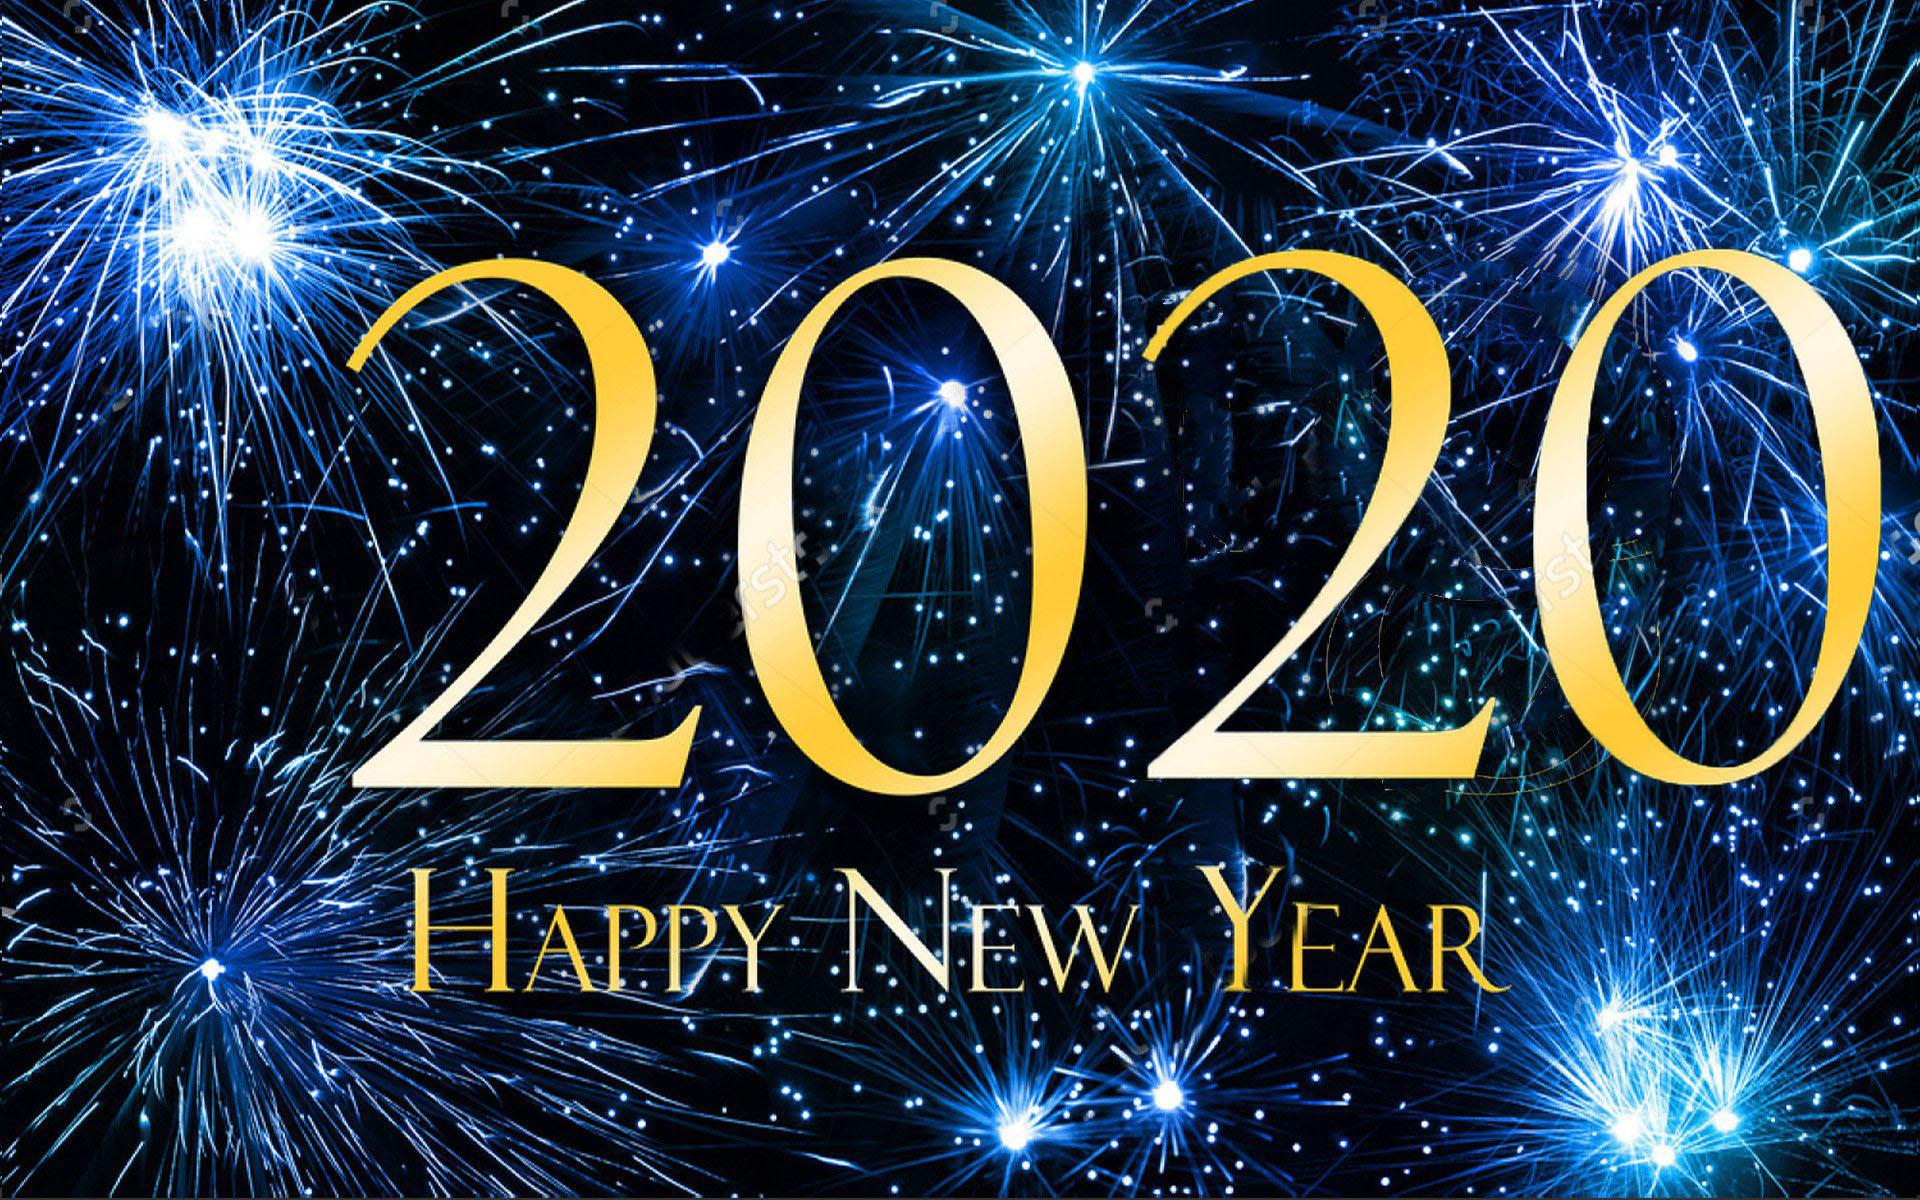 Happy New Year 2020 Hd Wallpapers - Wallpaper Cave